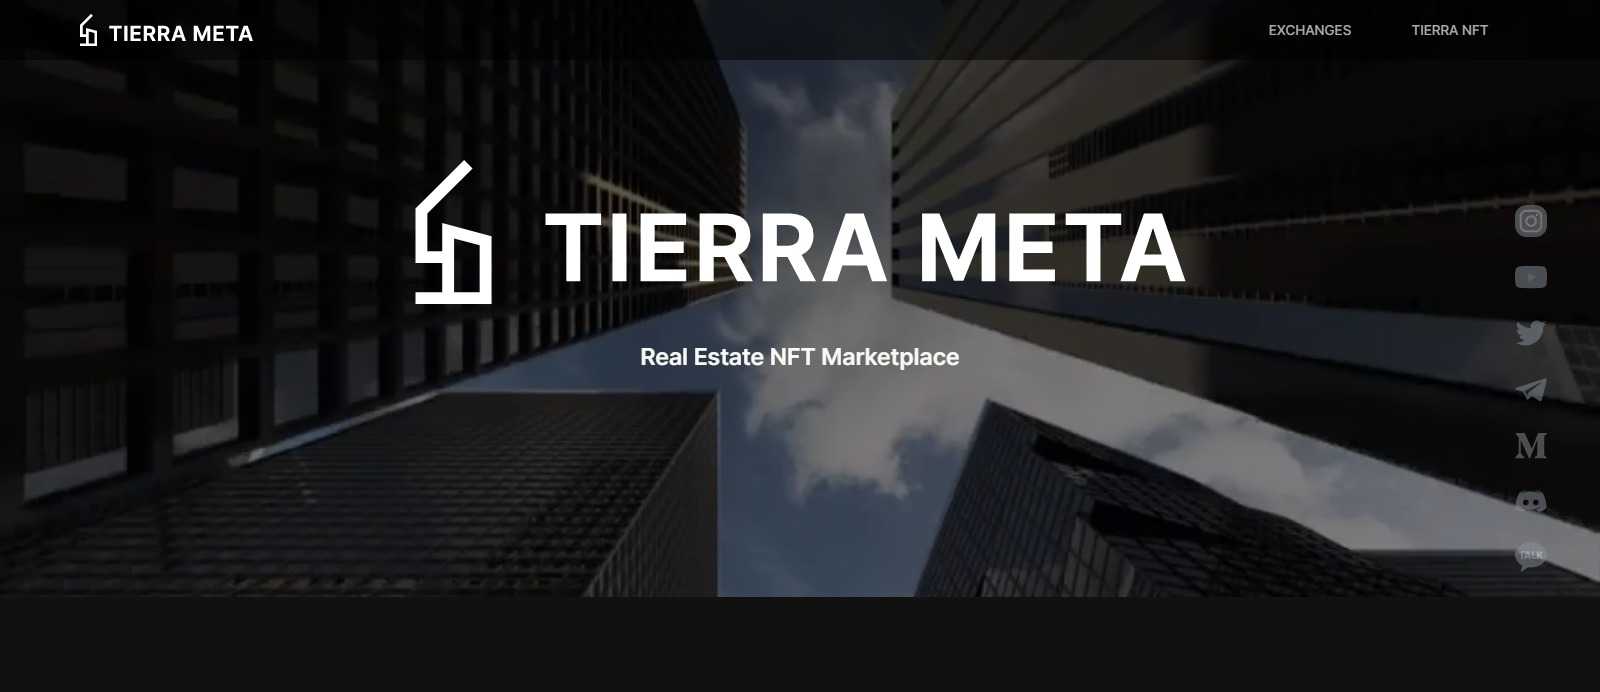 What Is Tierra Meta(TRMT)? Complete Guide & Review About Castello Coin